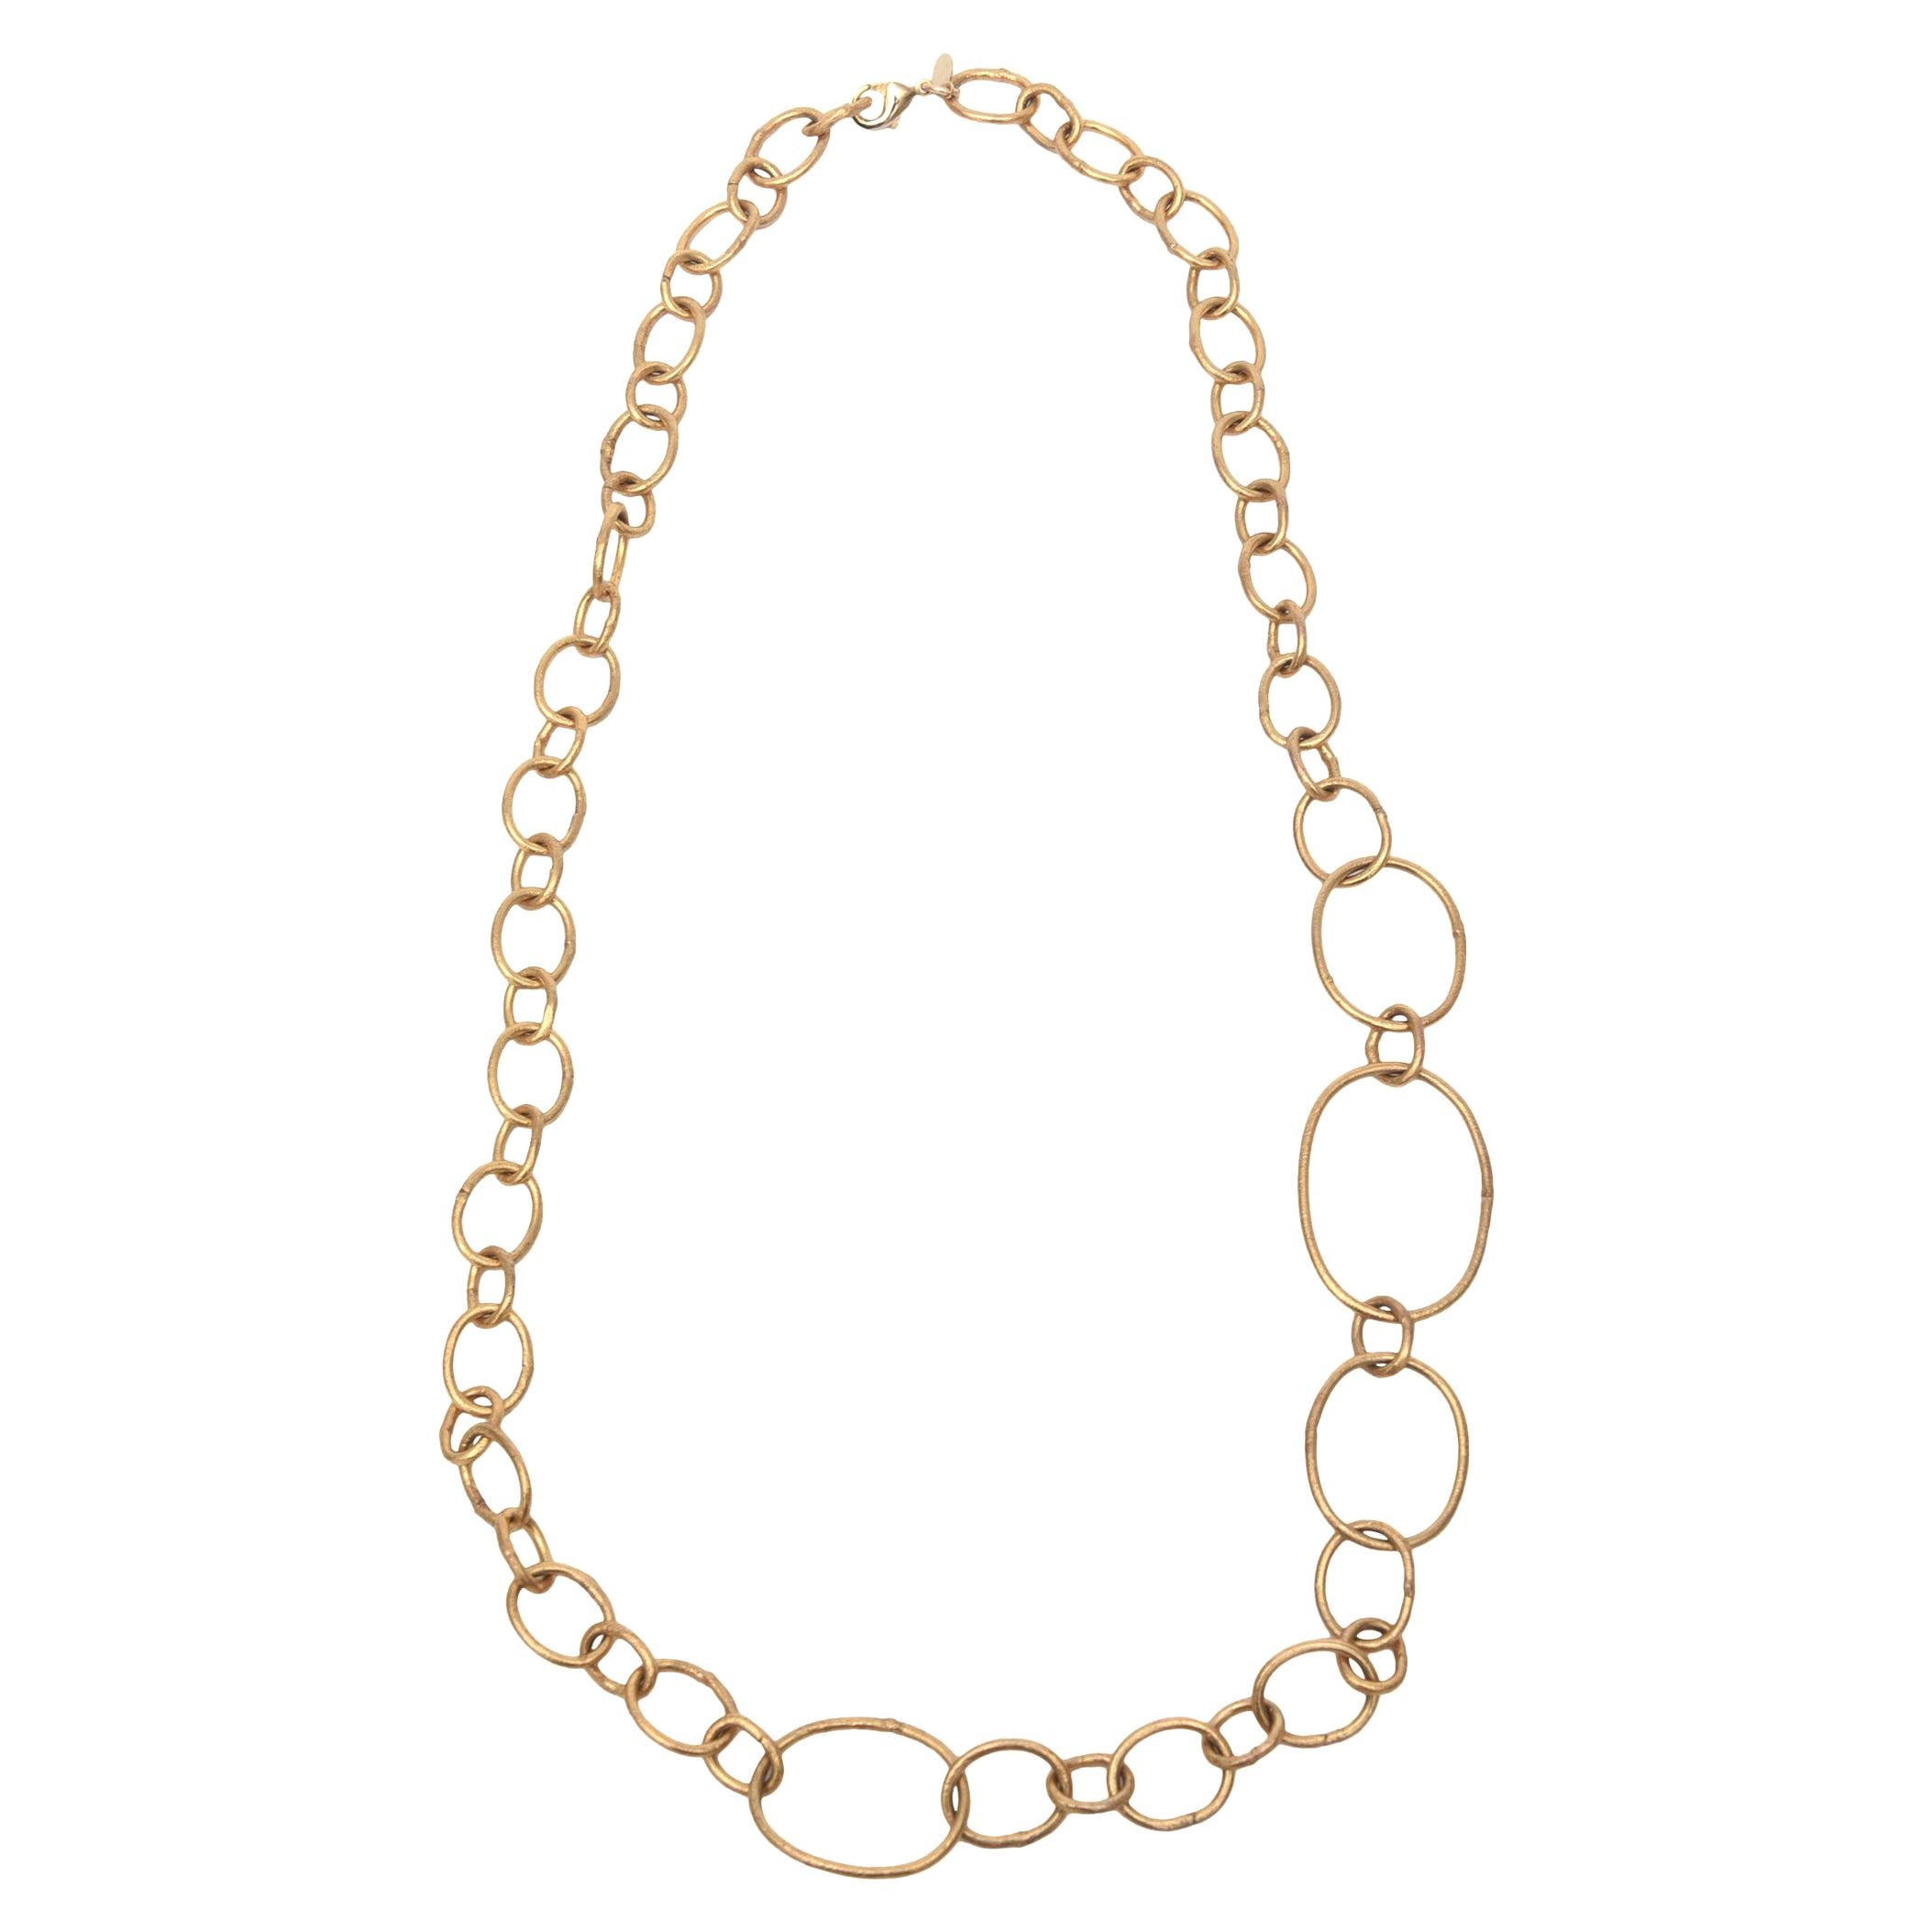 Alexis Bittar Link Chain Necklace